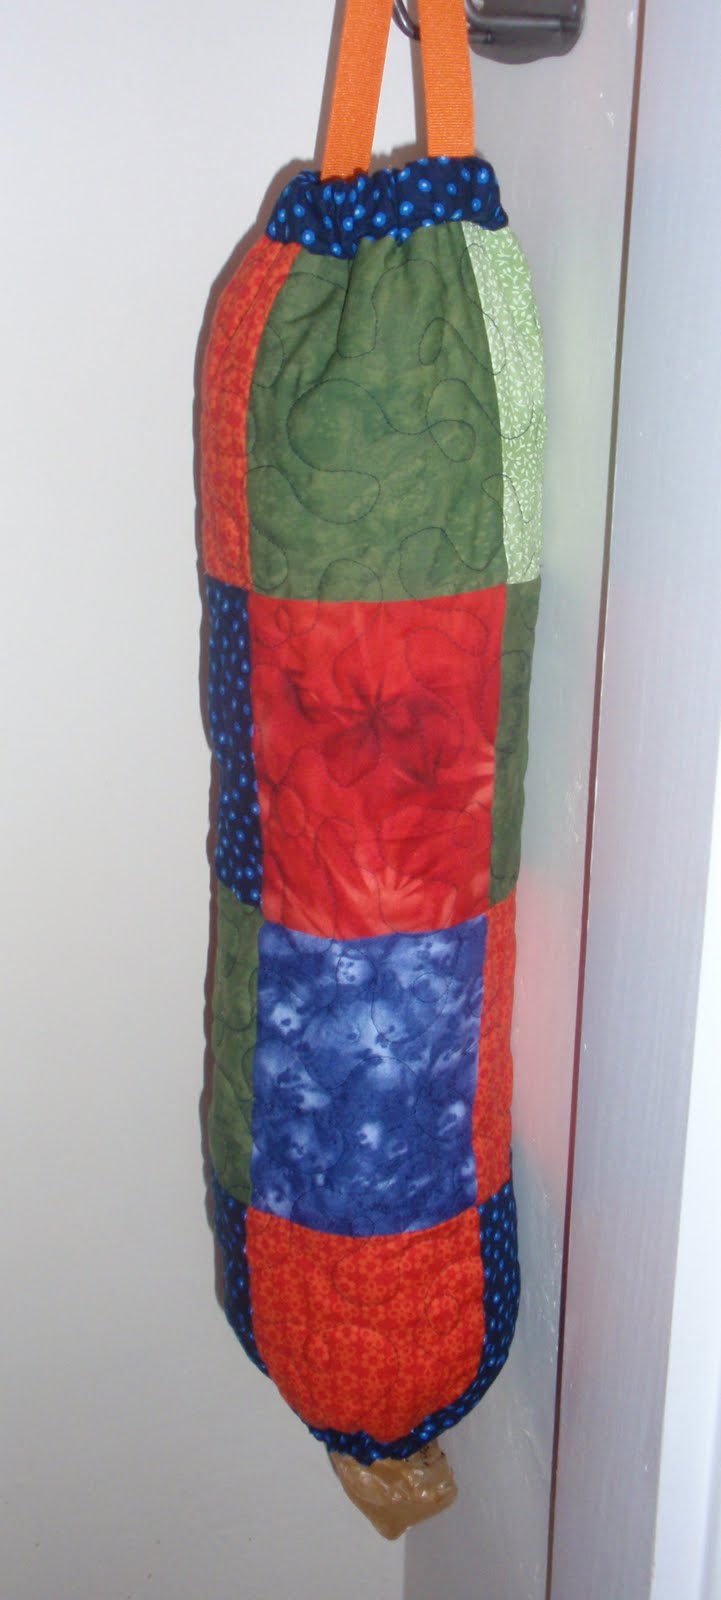 Quilted Grocery Bag Holder